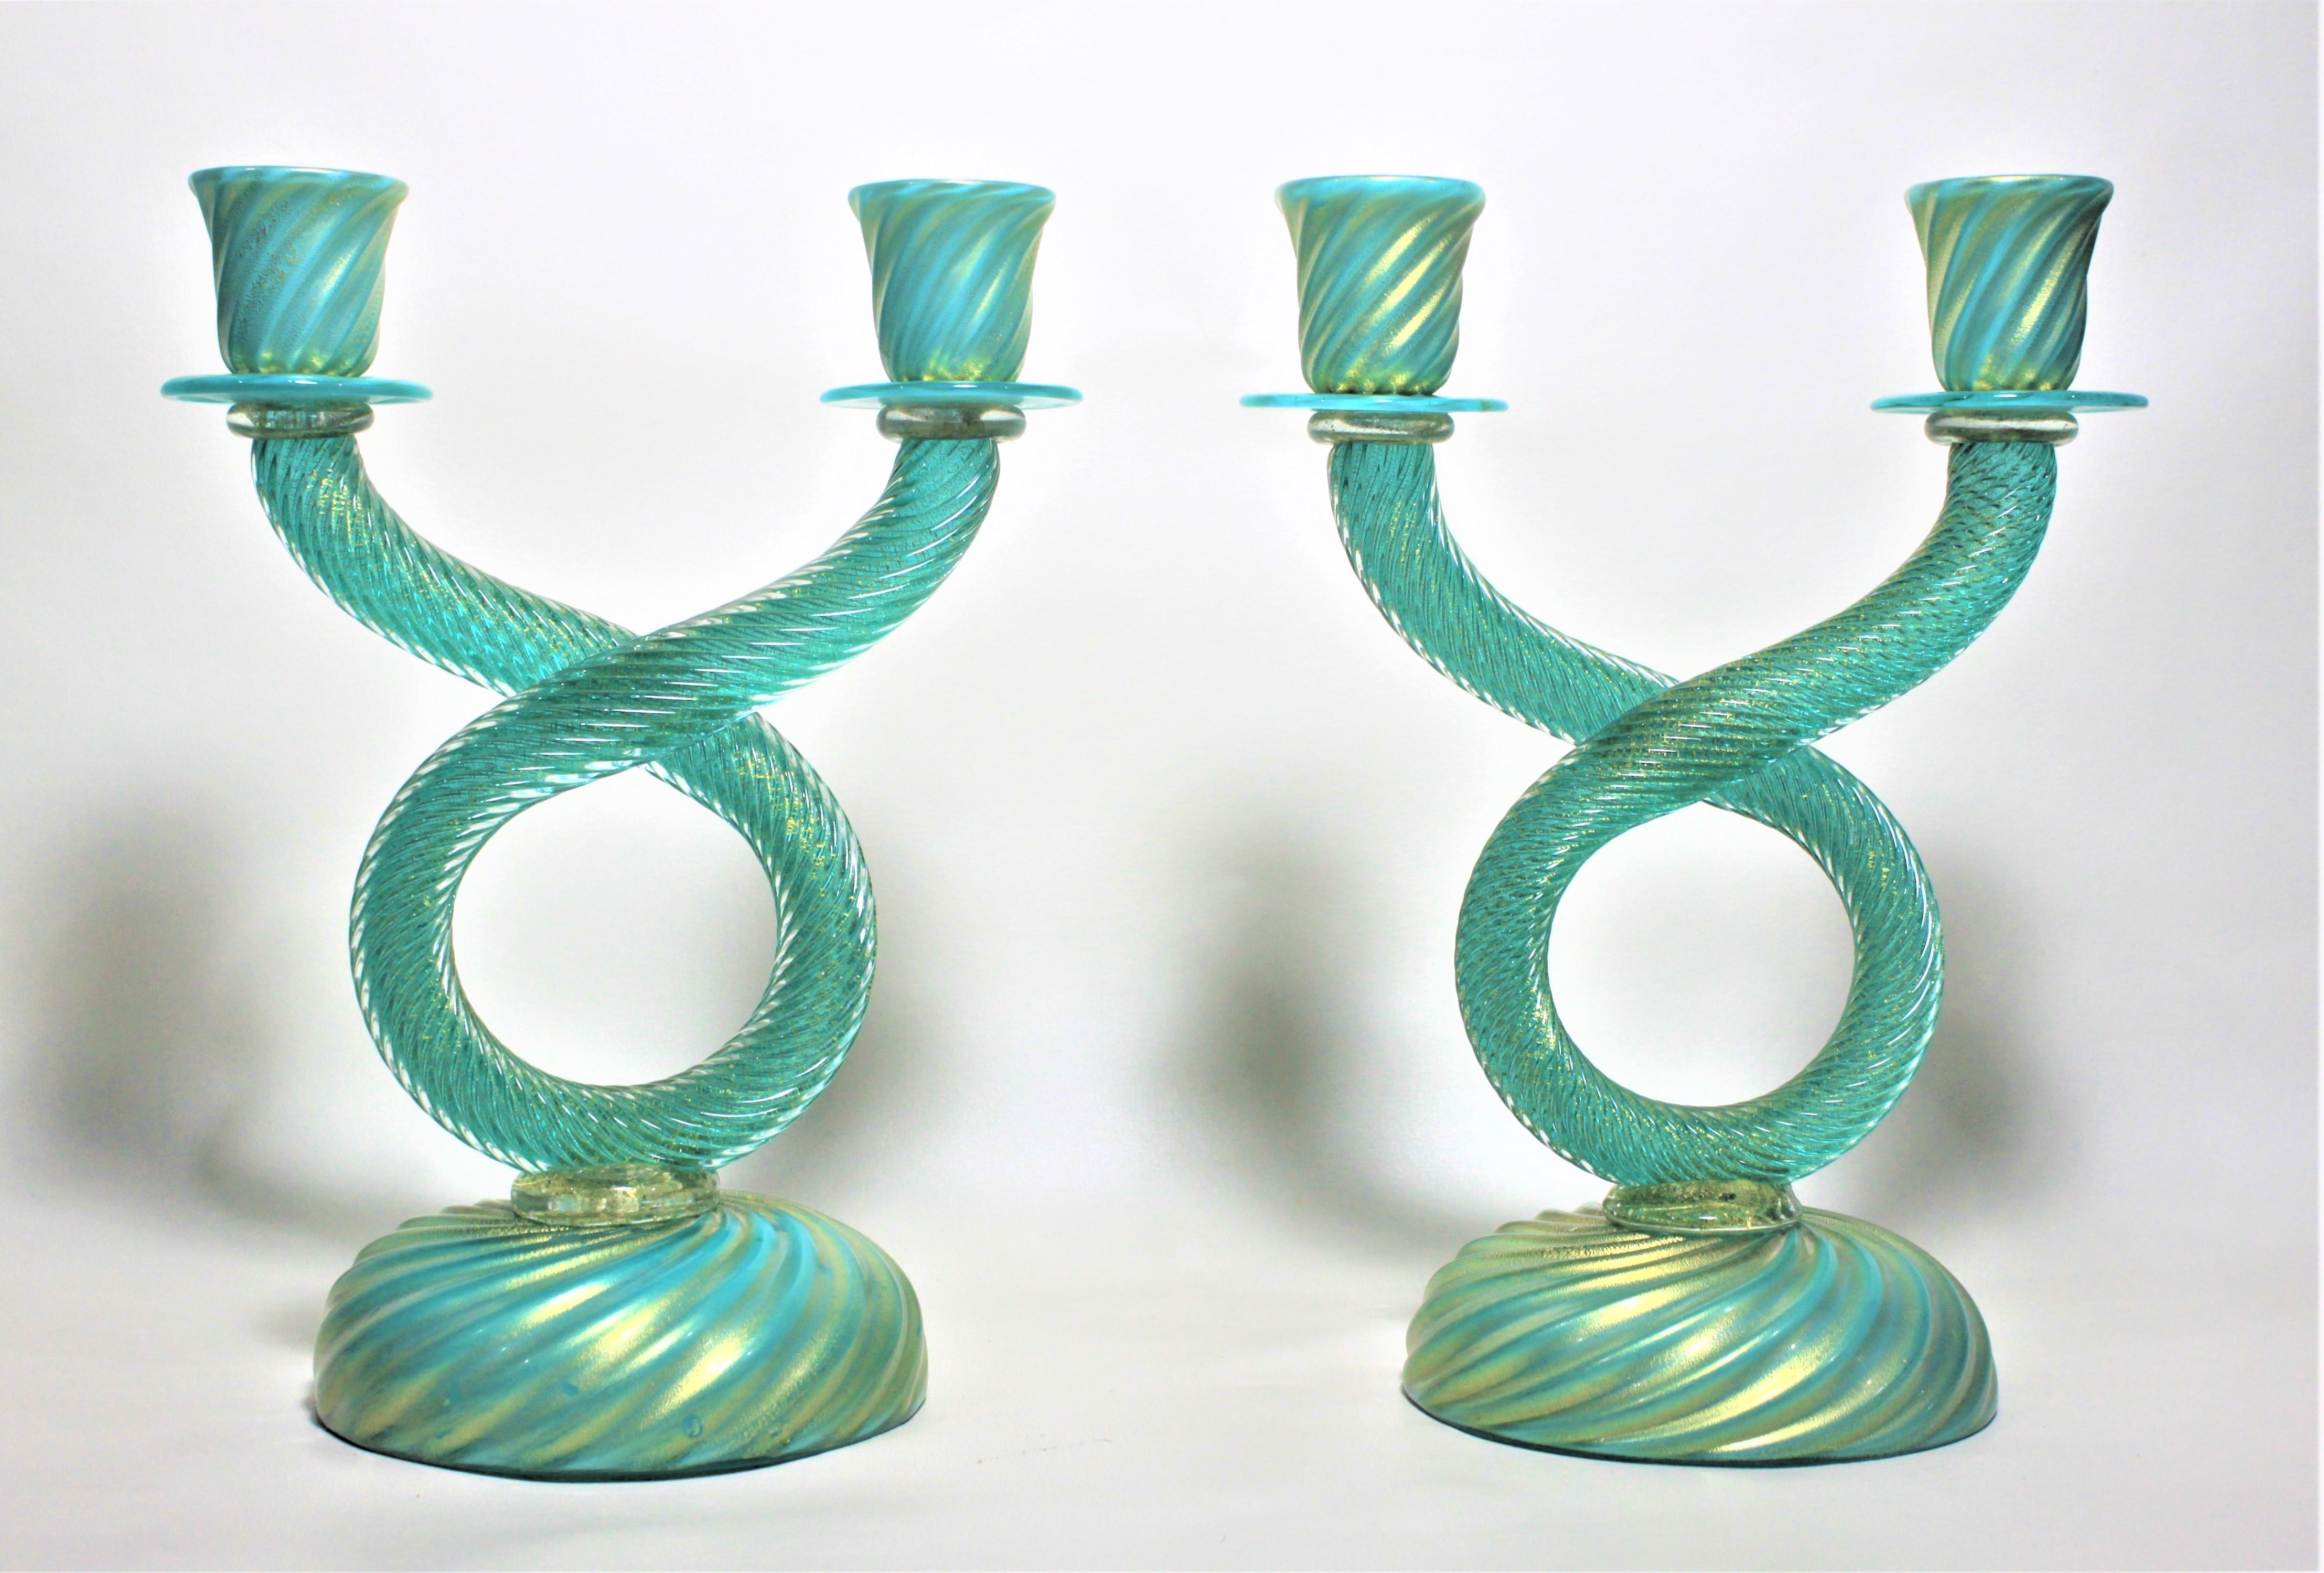 Large pair of midcentury Murano cased blue and green double candlesticks done in the style of Barovier & Toso. These candlesticks executed in a dark emerald green swirled base, swirled rope style risers and topped with swirled and cased green and